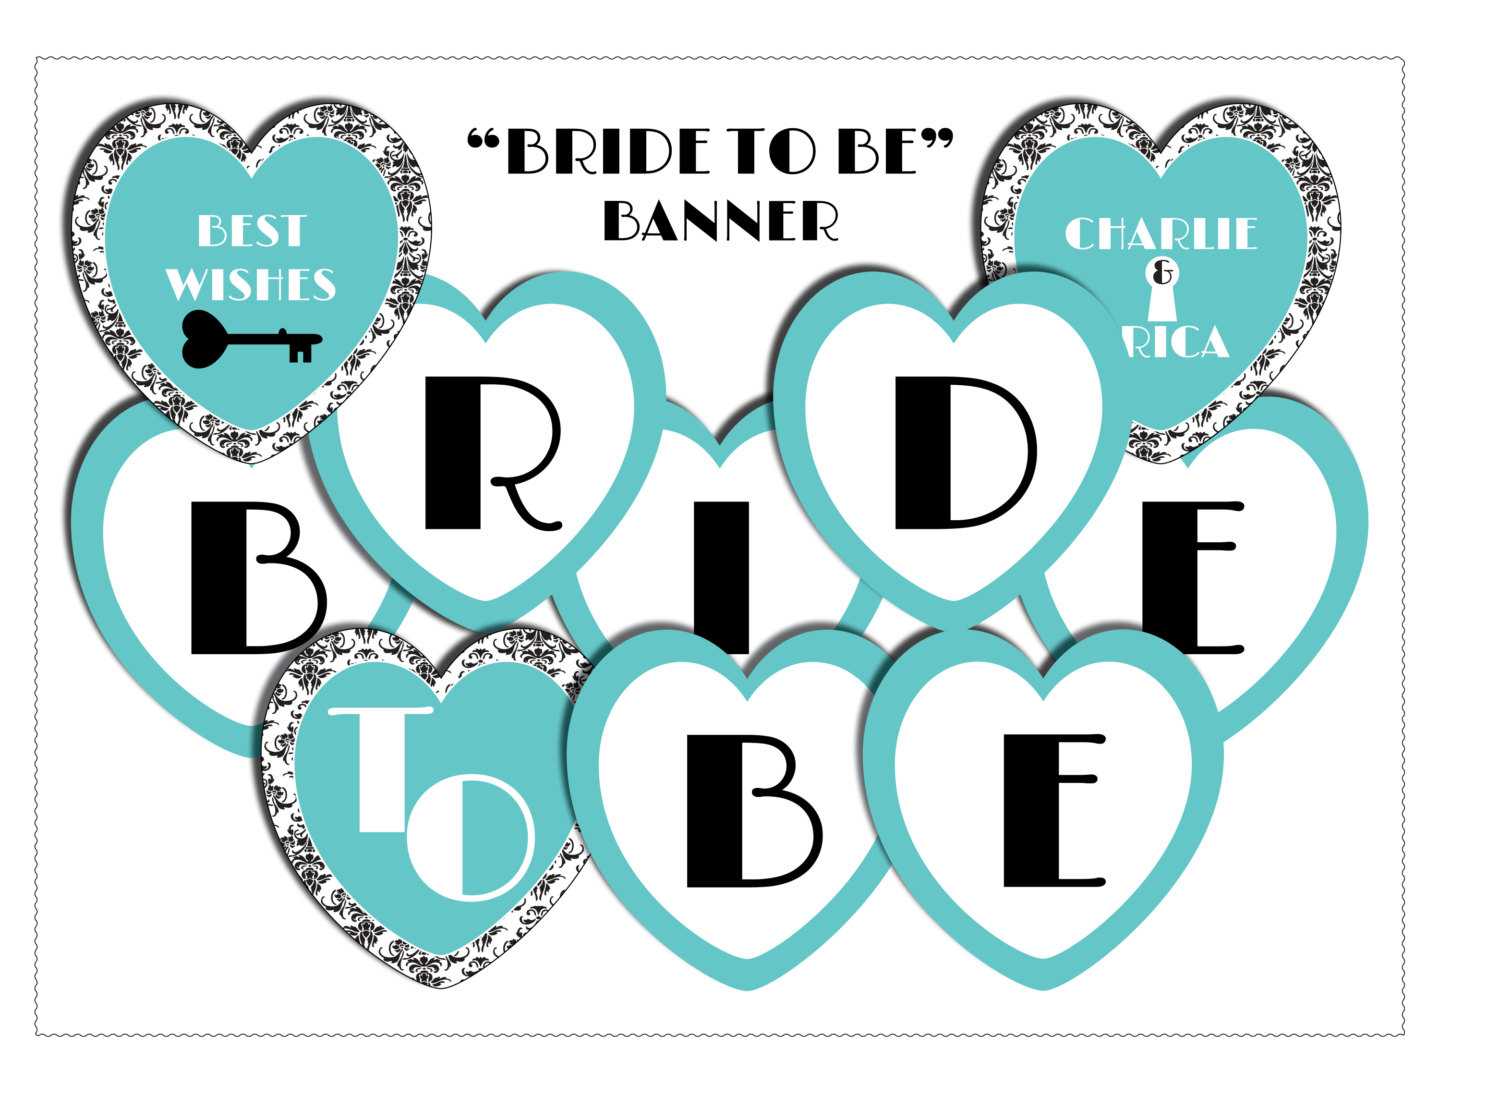 From Miss To Mrs Banner Template – Best Banner Design 2018 Within Bridal Shower Banner Template